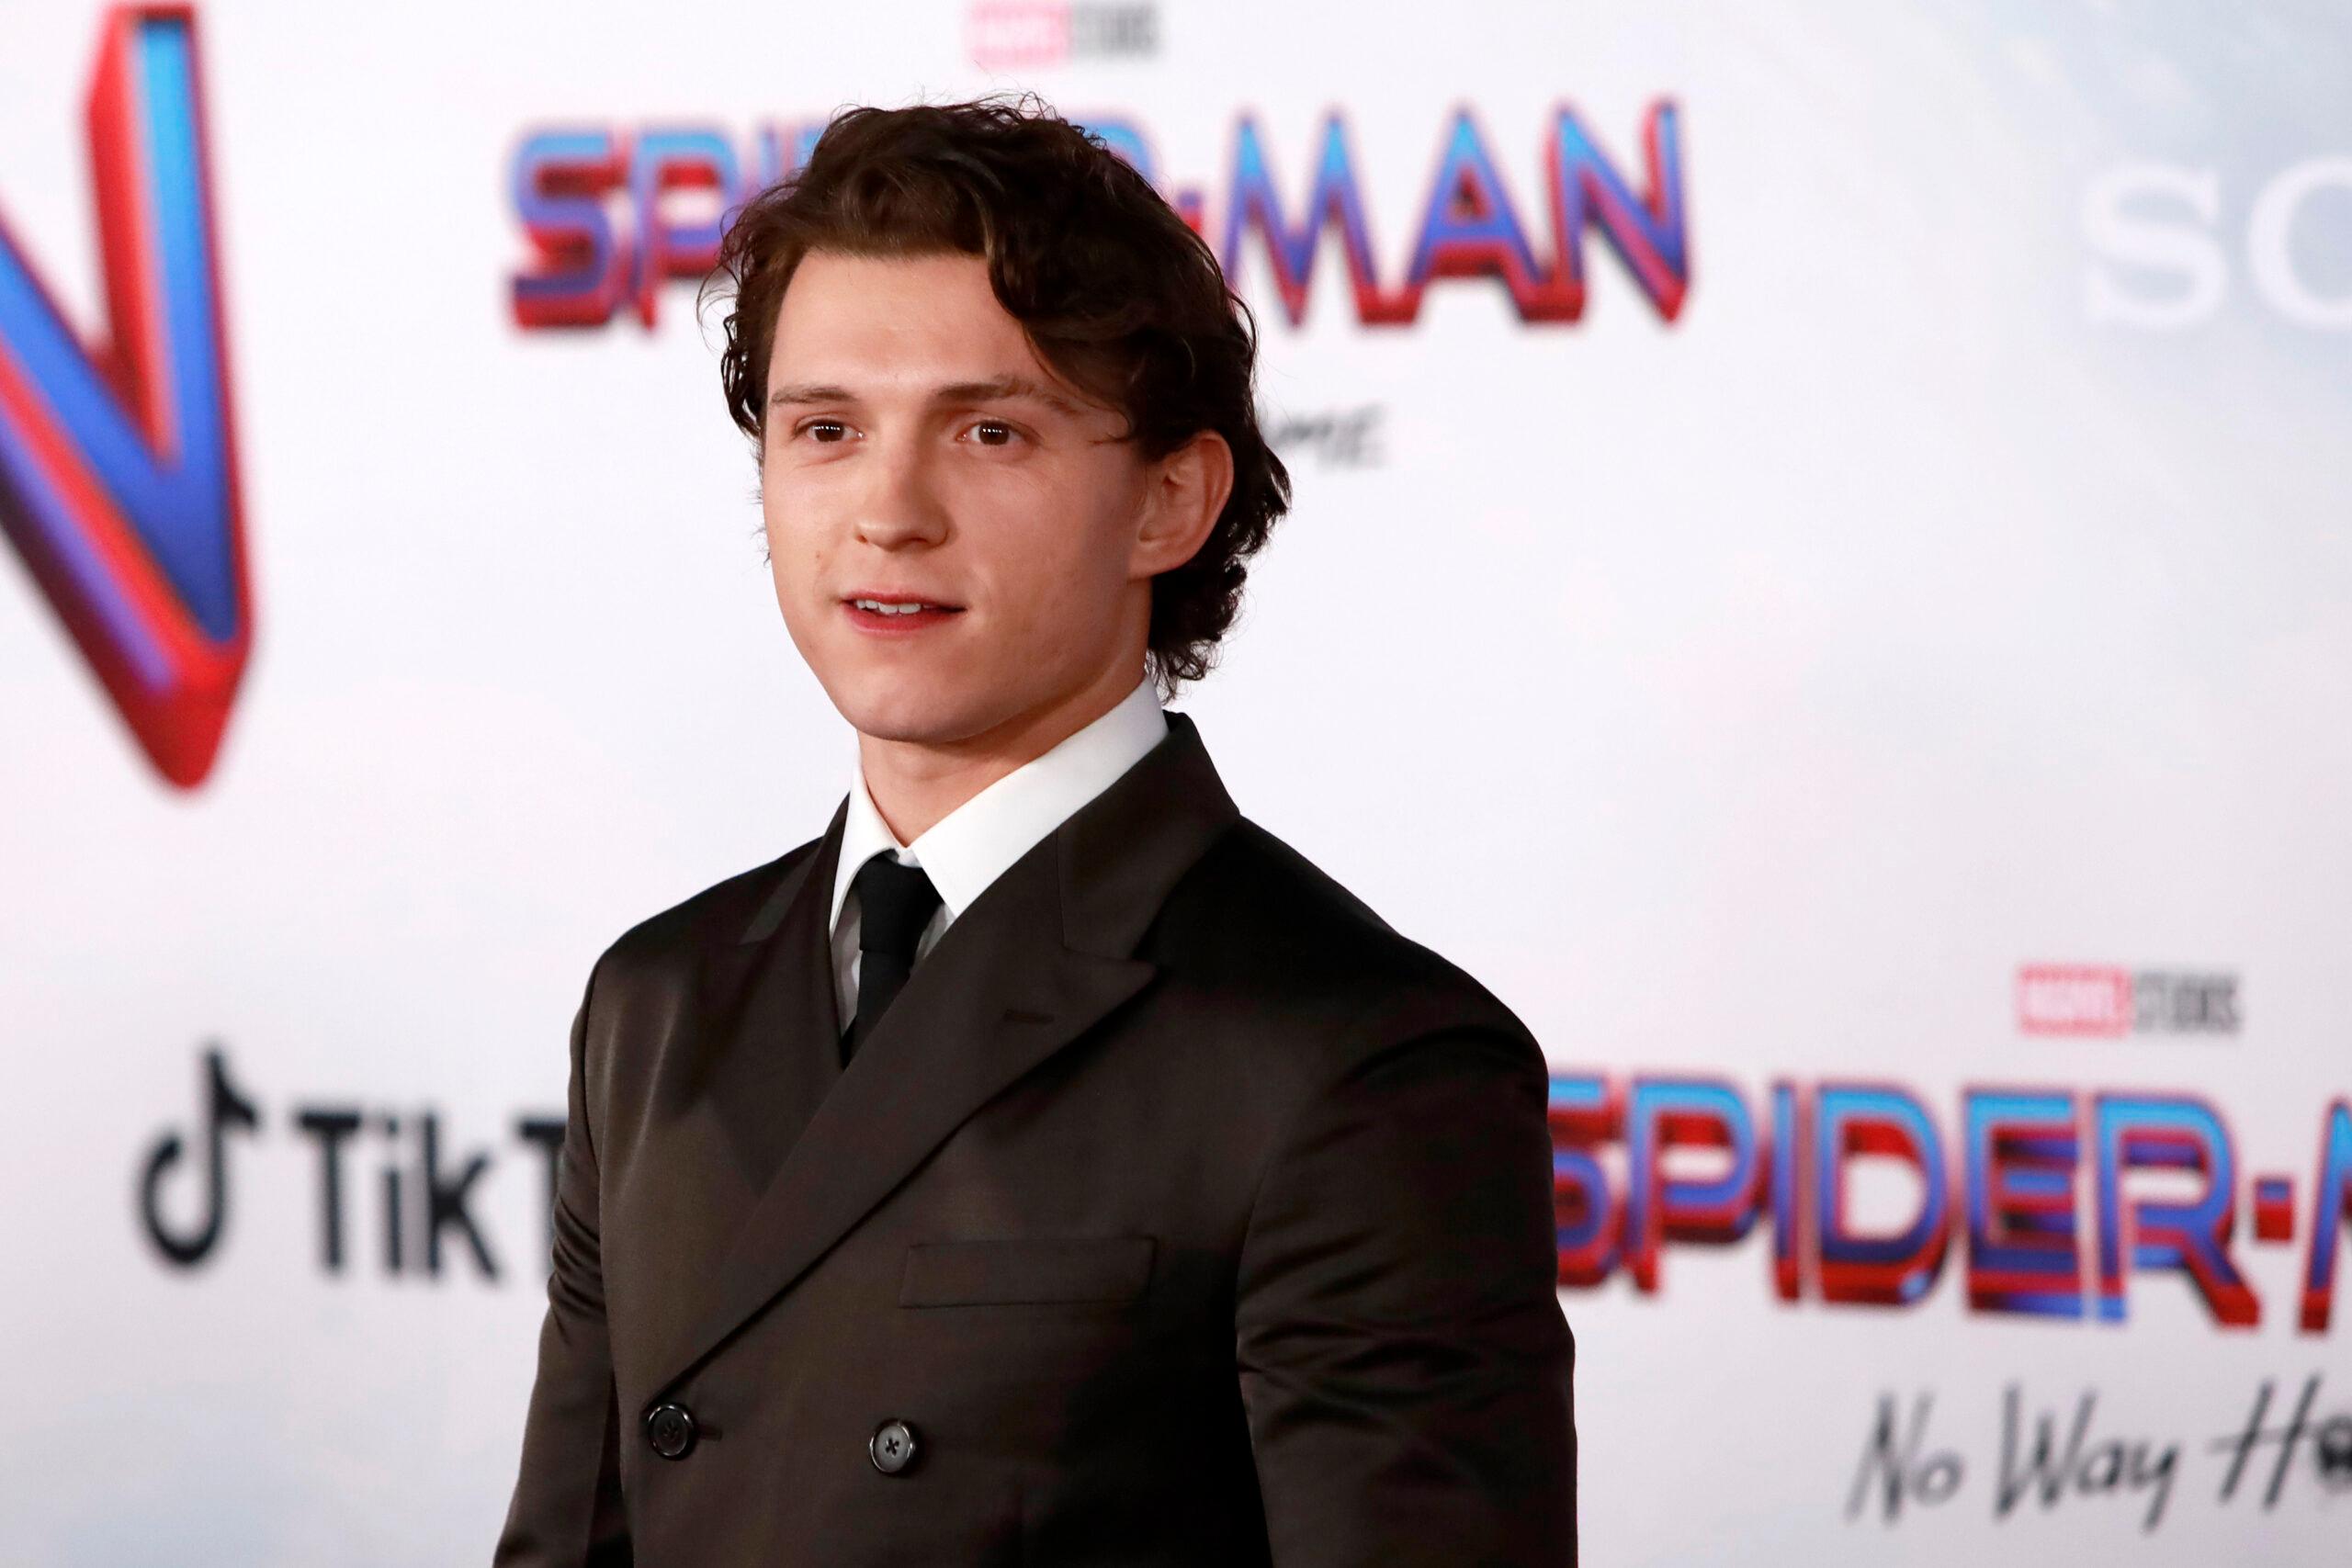 LOS ANGELES - DEC 13: Tom Holland at the Spider-Man: No Way Home Premiere at the Village Theater on December 13, 2021 in Los Angeles